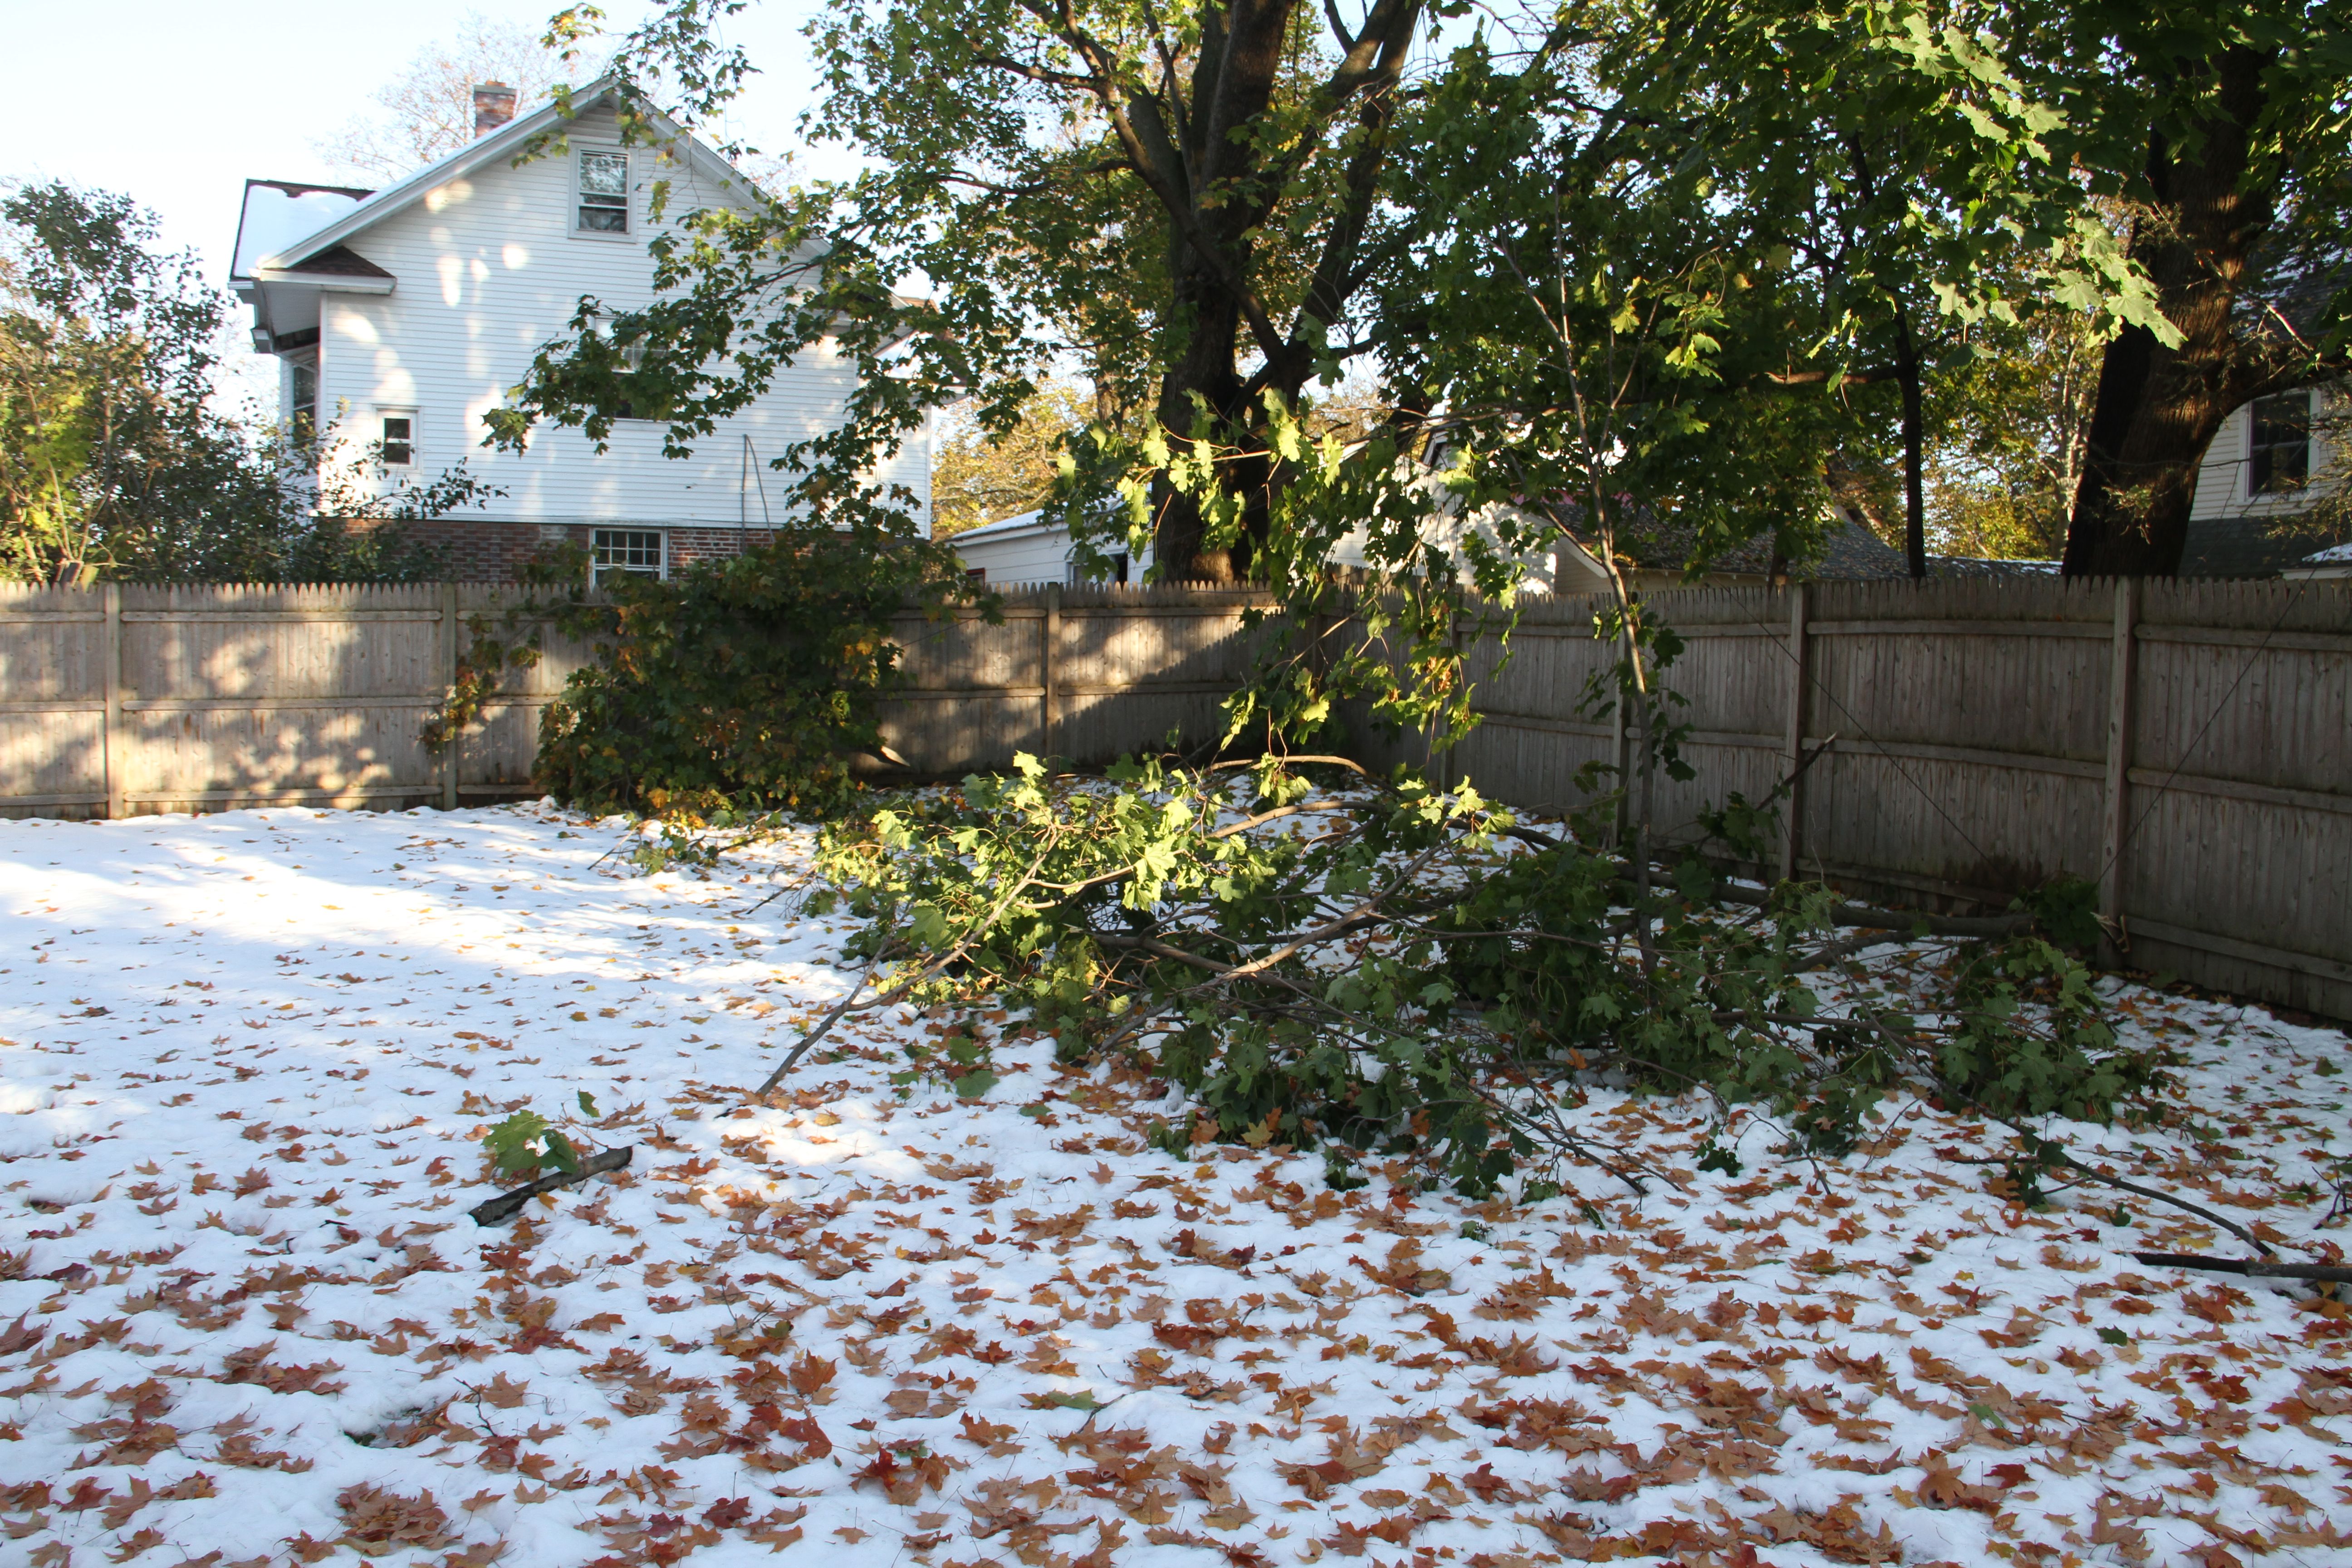 Our yard was littered with large limbs and branches that tangled the phone, cable and power lines across the fences and through the remaining tree boughs.